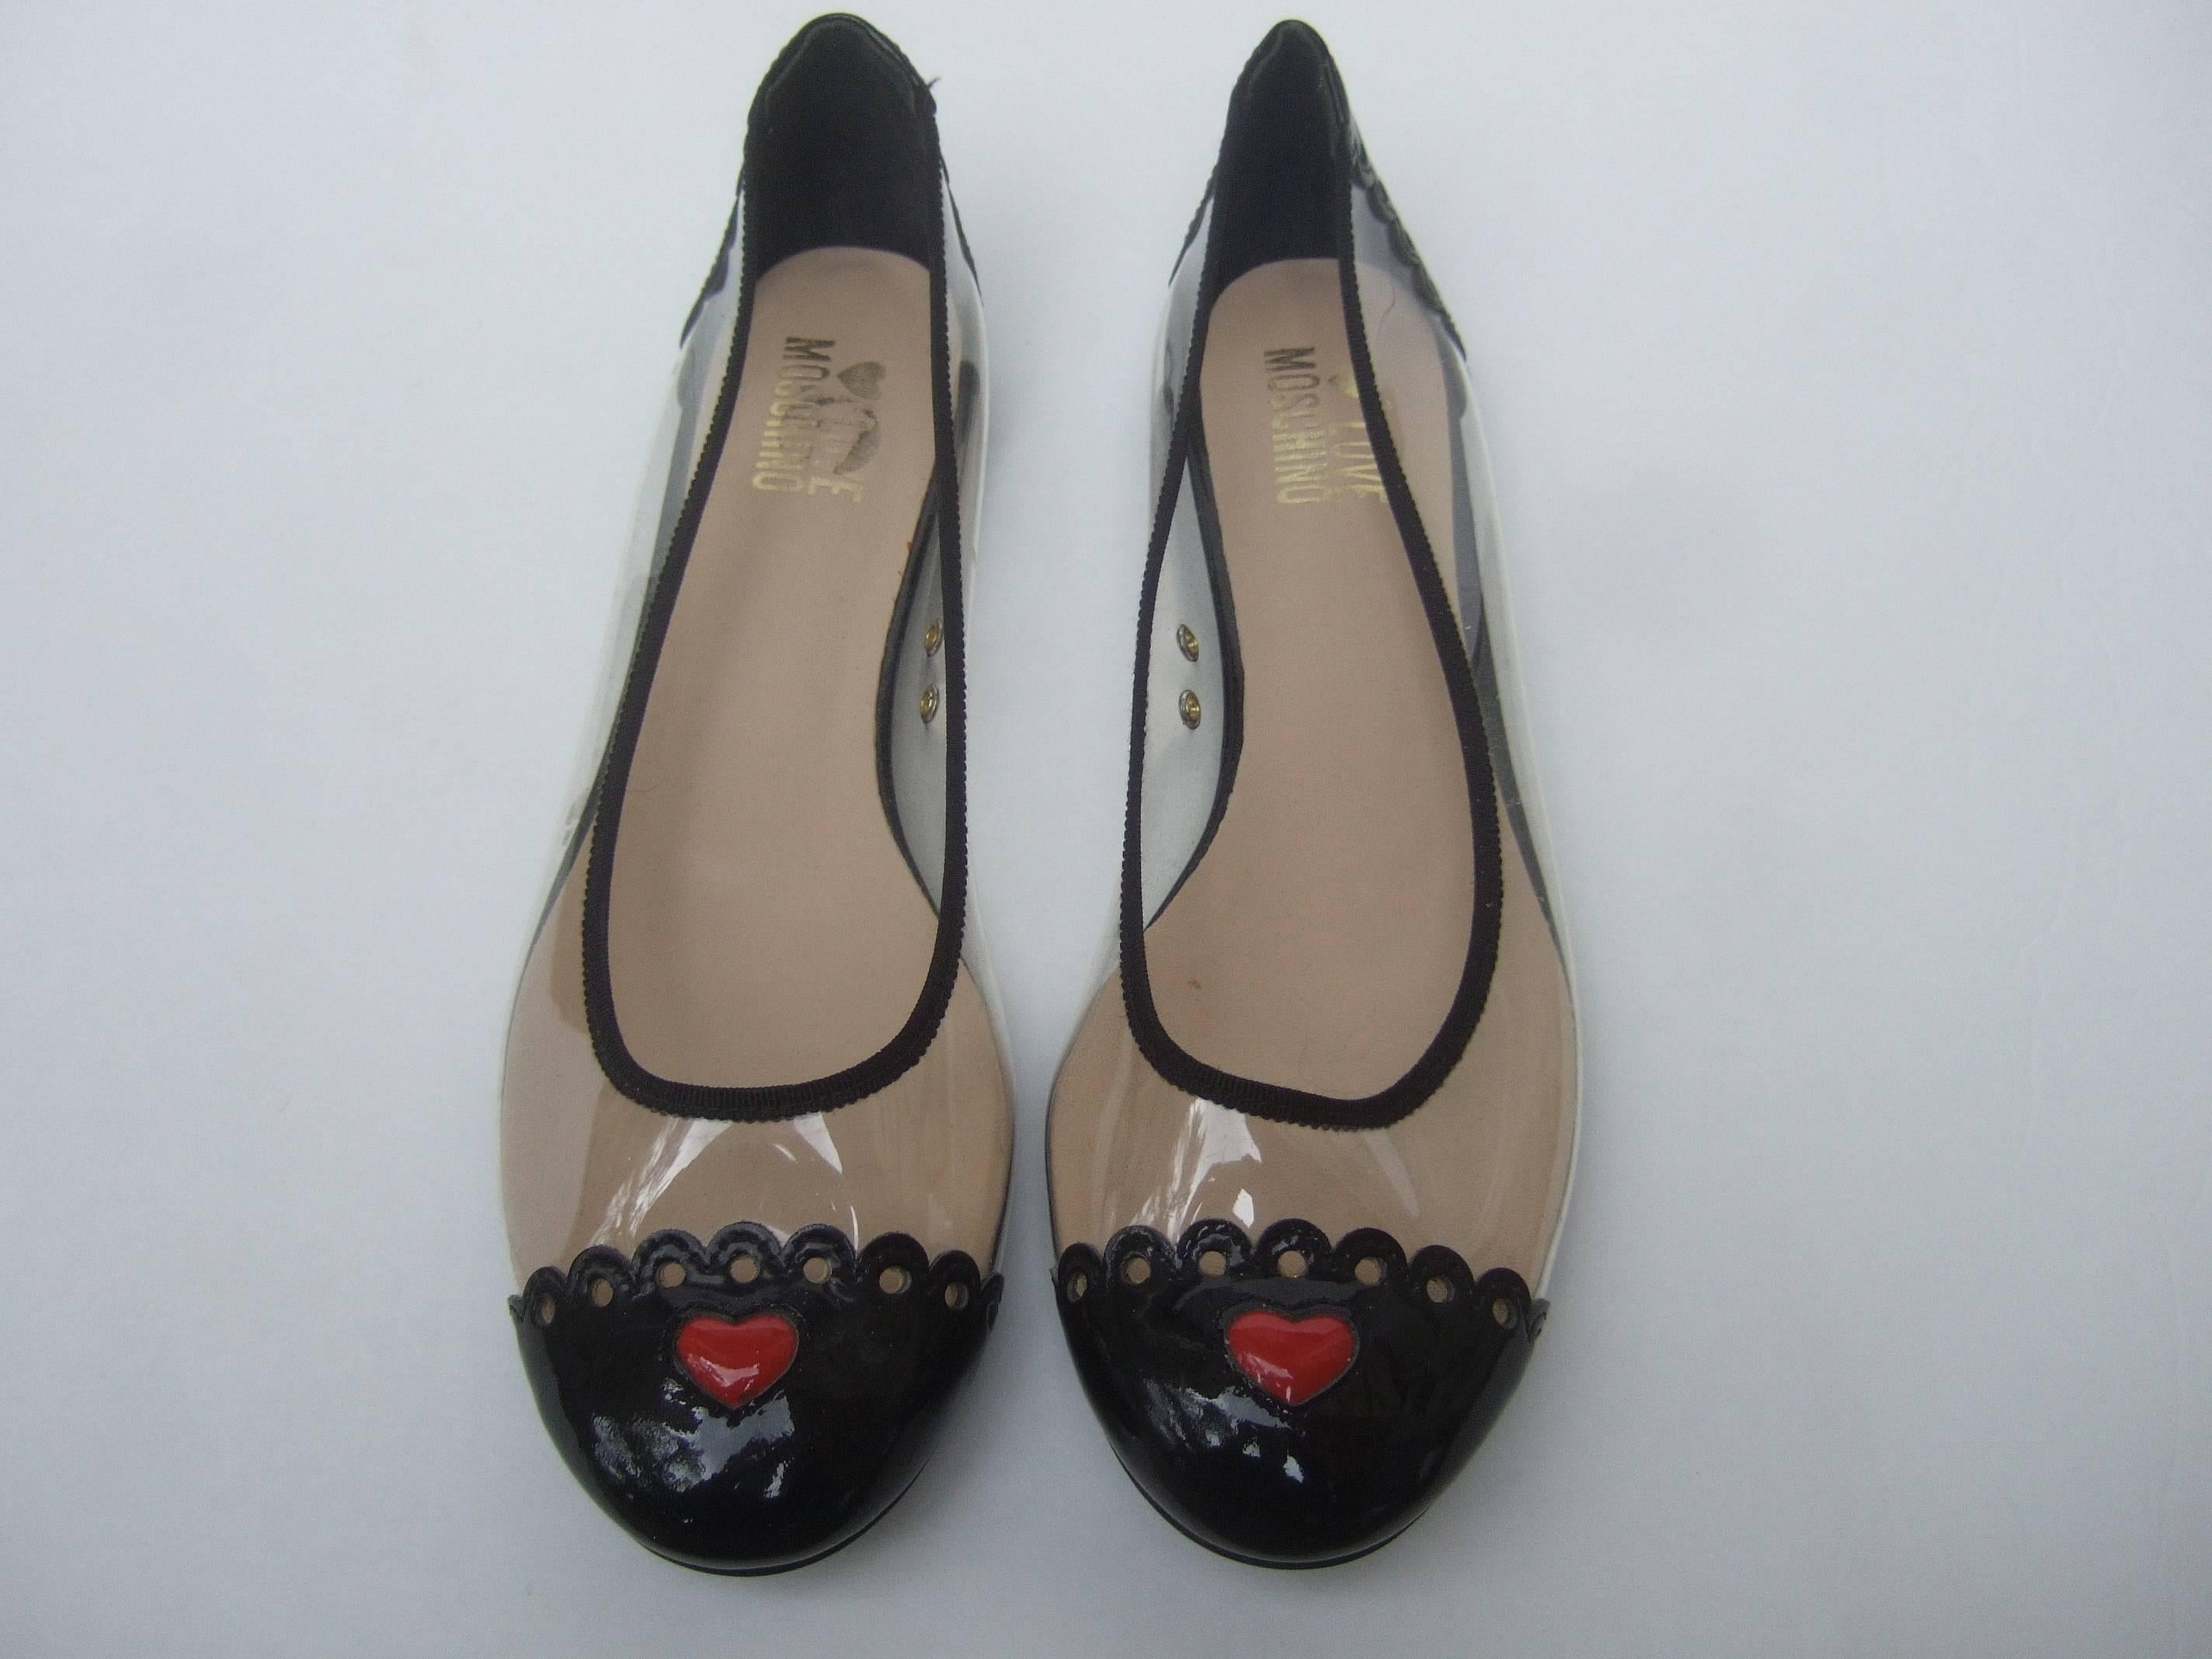 Women's Moschino Cap Toe Ballet Style Flats in Box Size 38